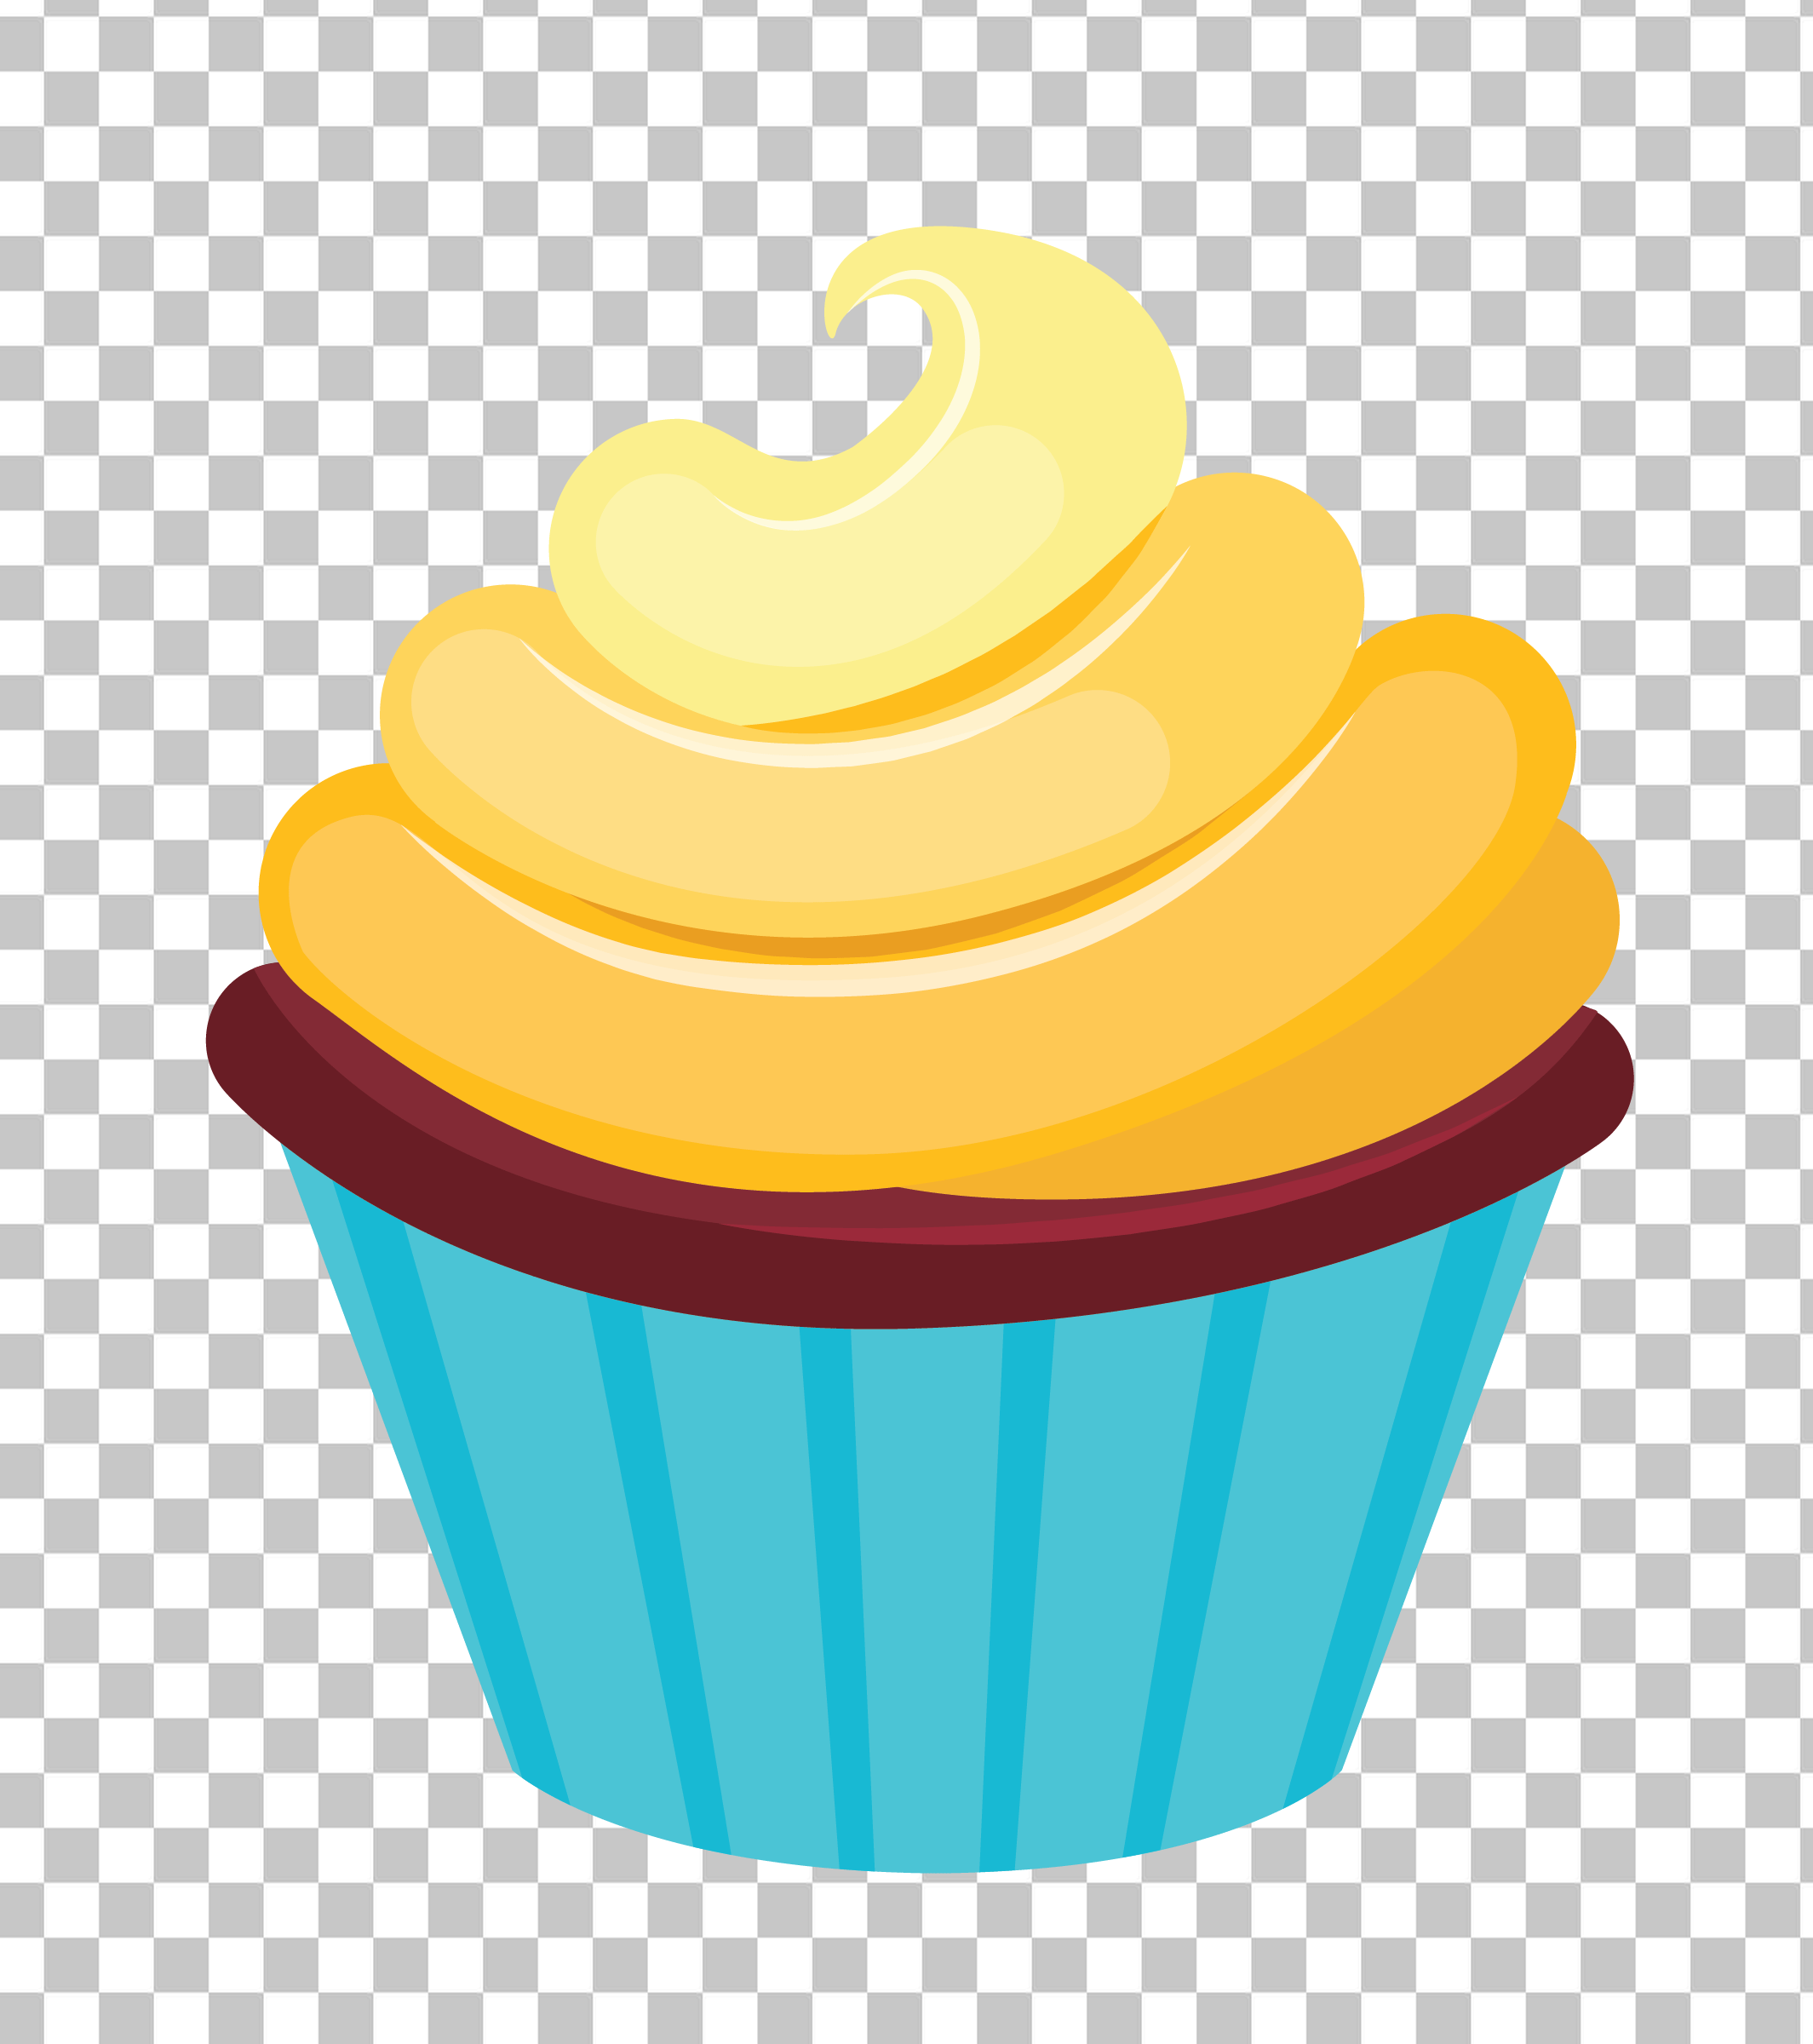 Muffin PNG Image